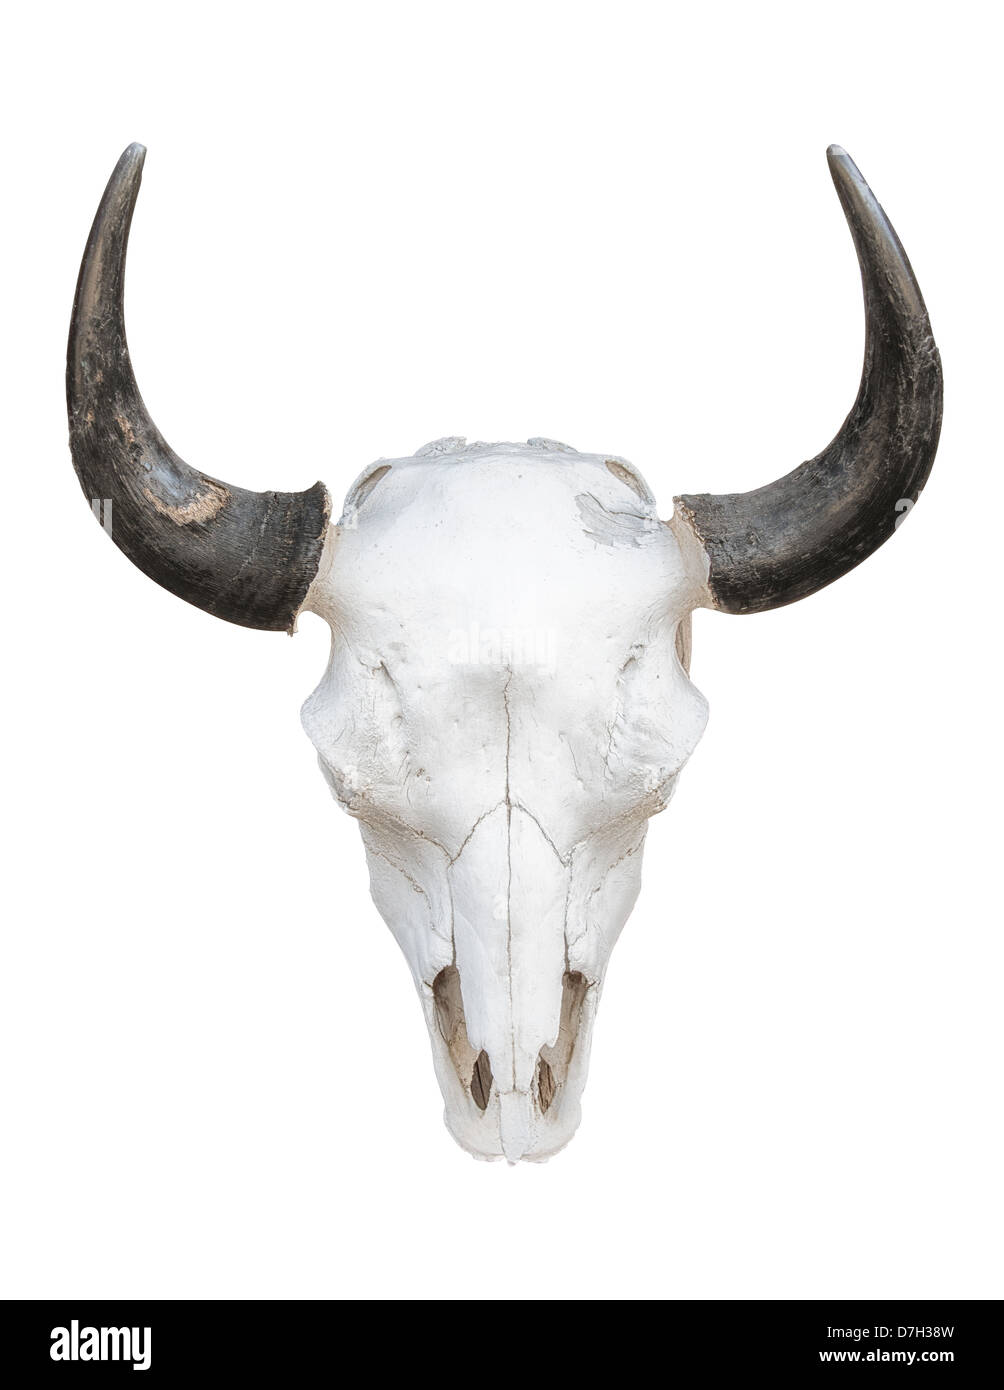 Cow skull knock on white. very large file life size at 300dpi Stock Photo